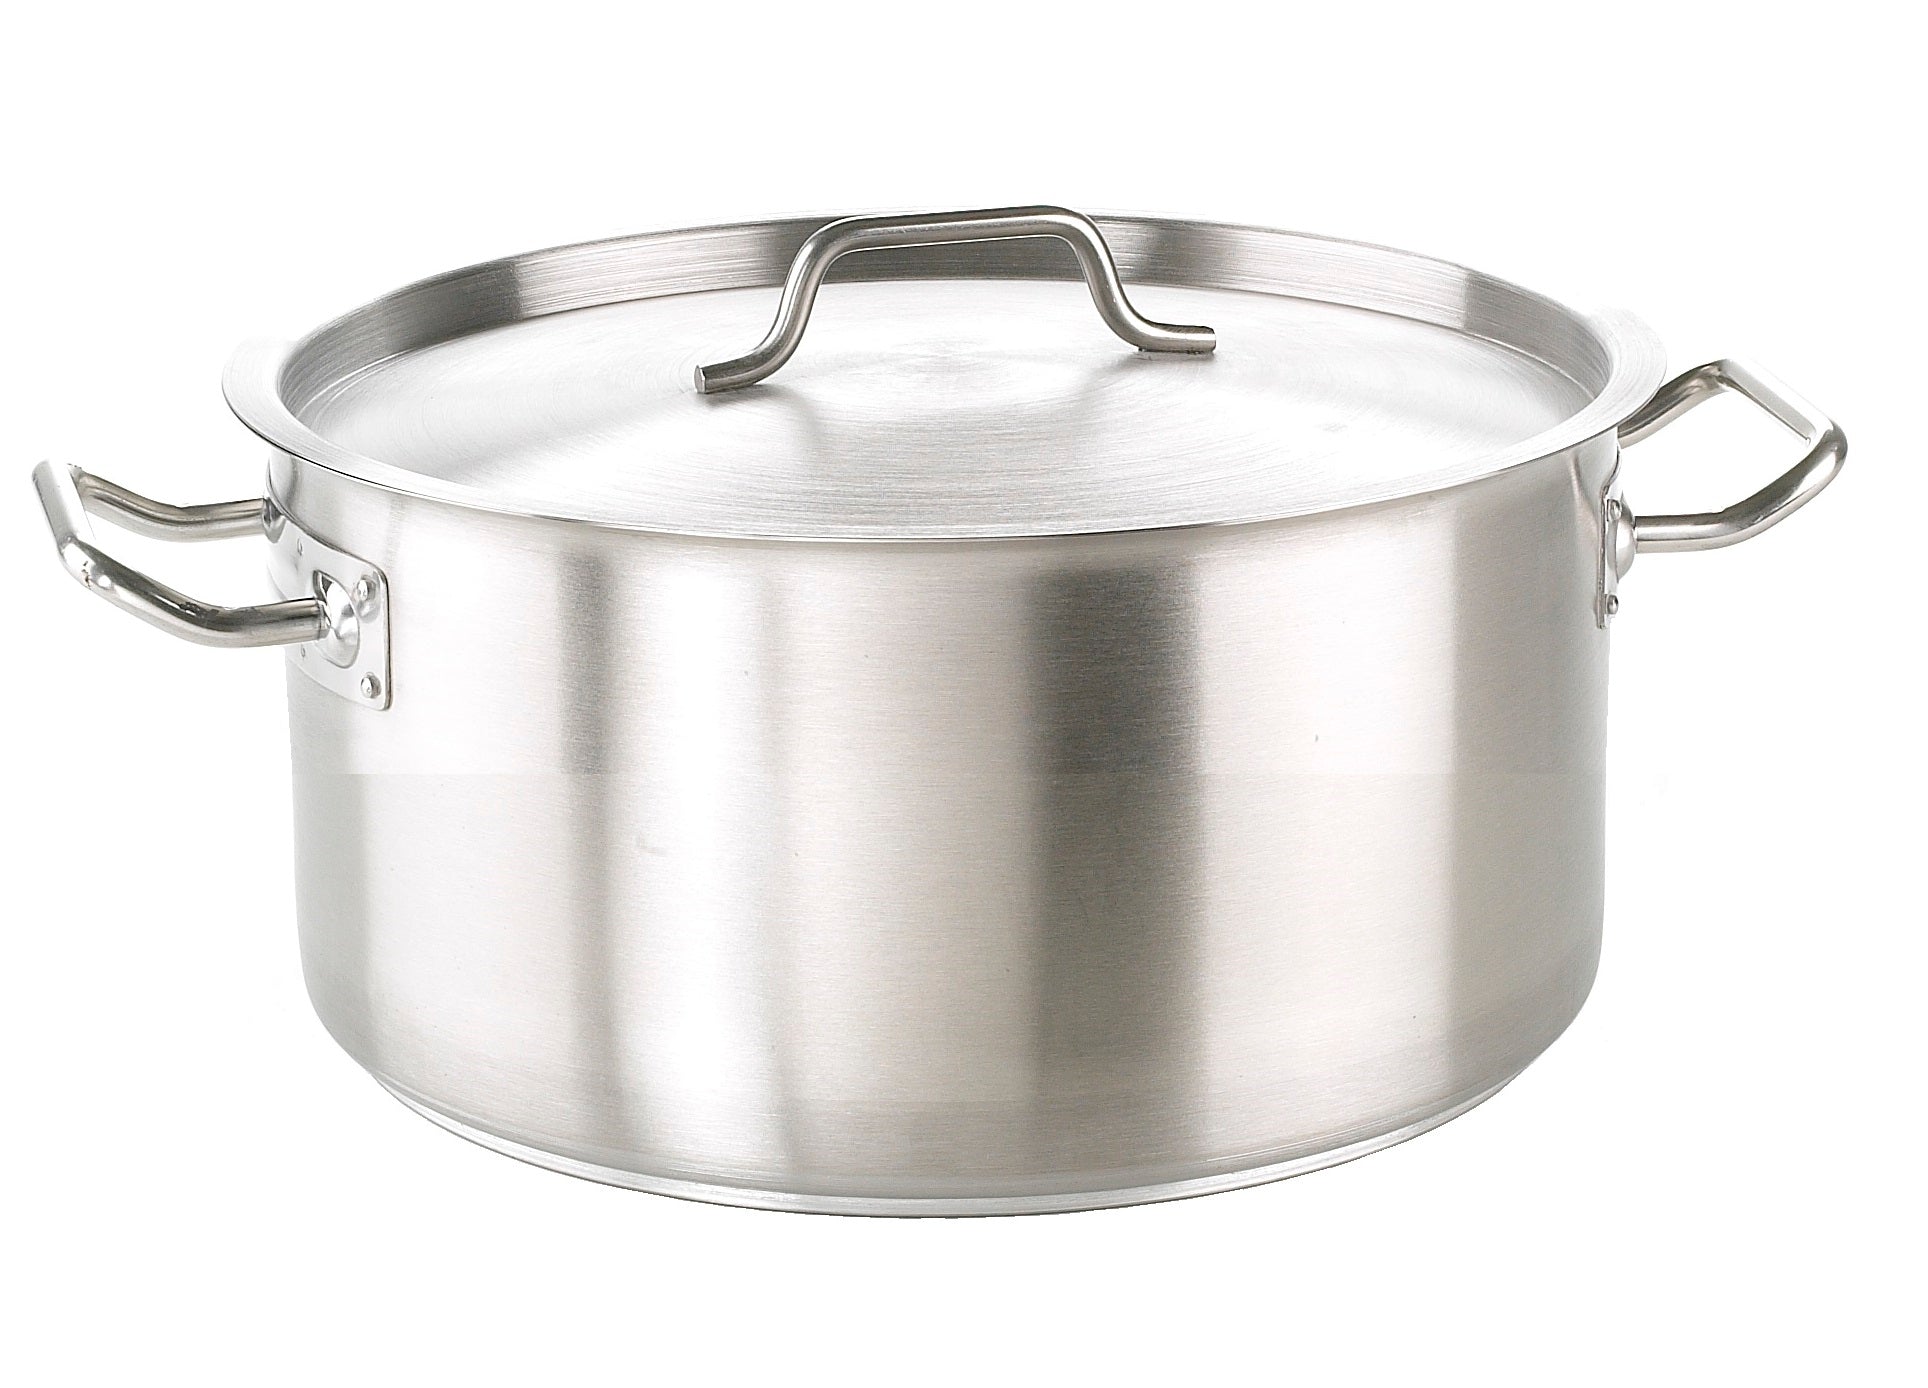 Bra Market – Low Casserole Dish 32 cm, Cast Aluminium with Non-Stick, PFOA  Free, Suitable for All Hobs Including Induction